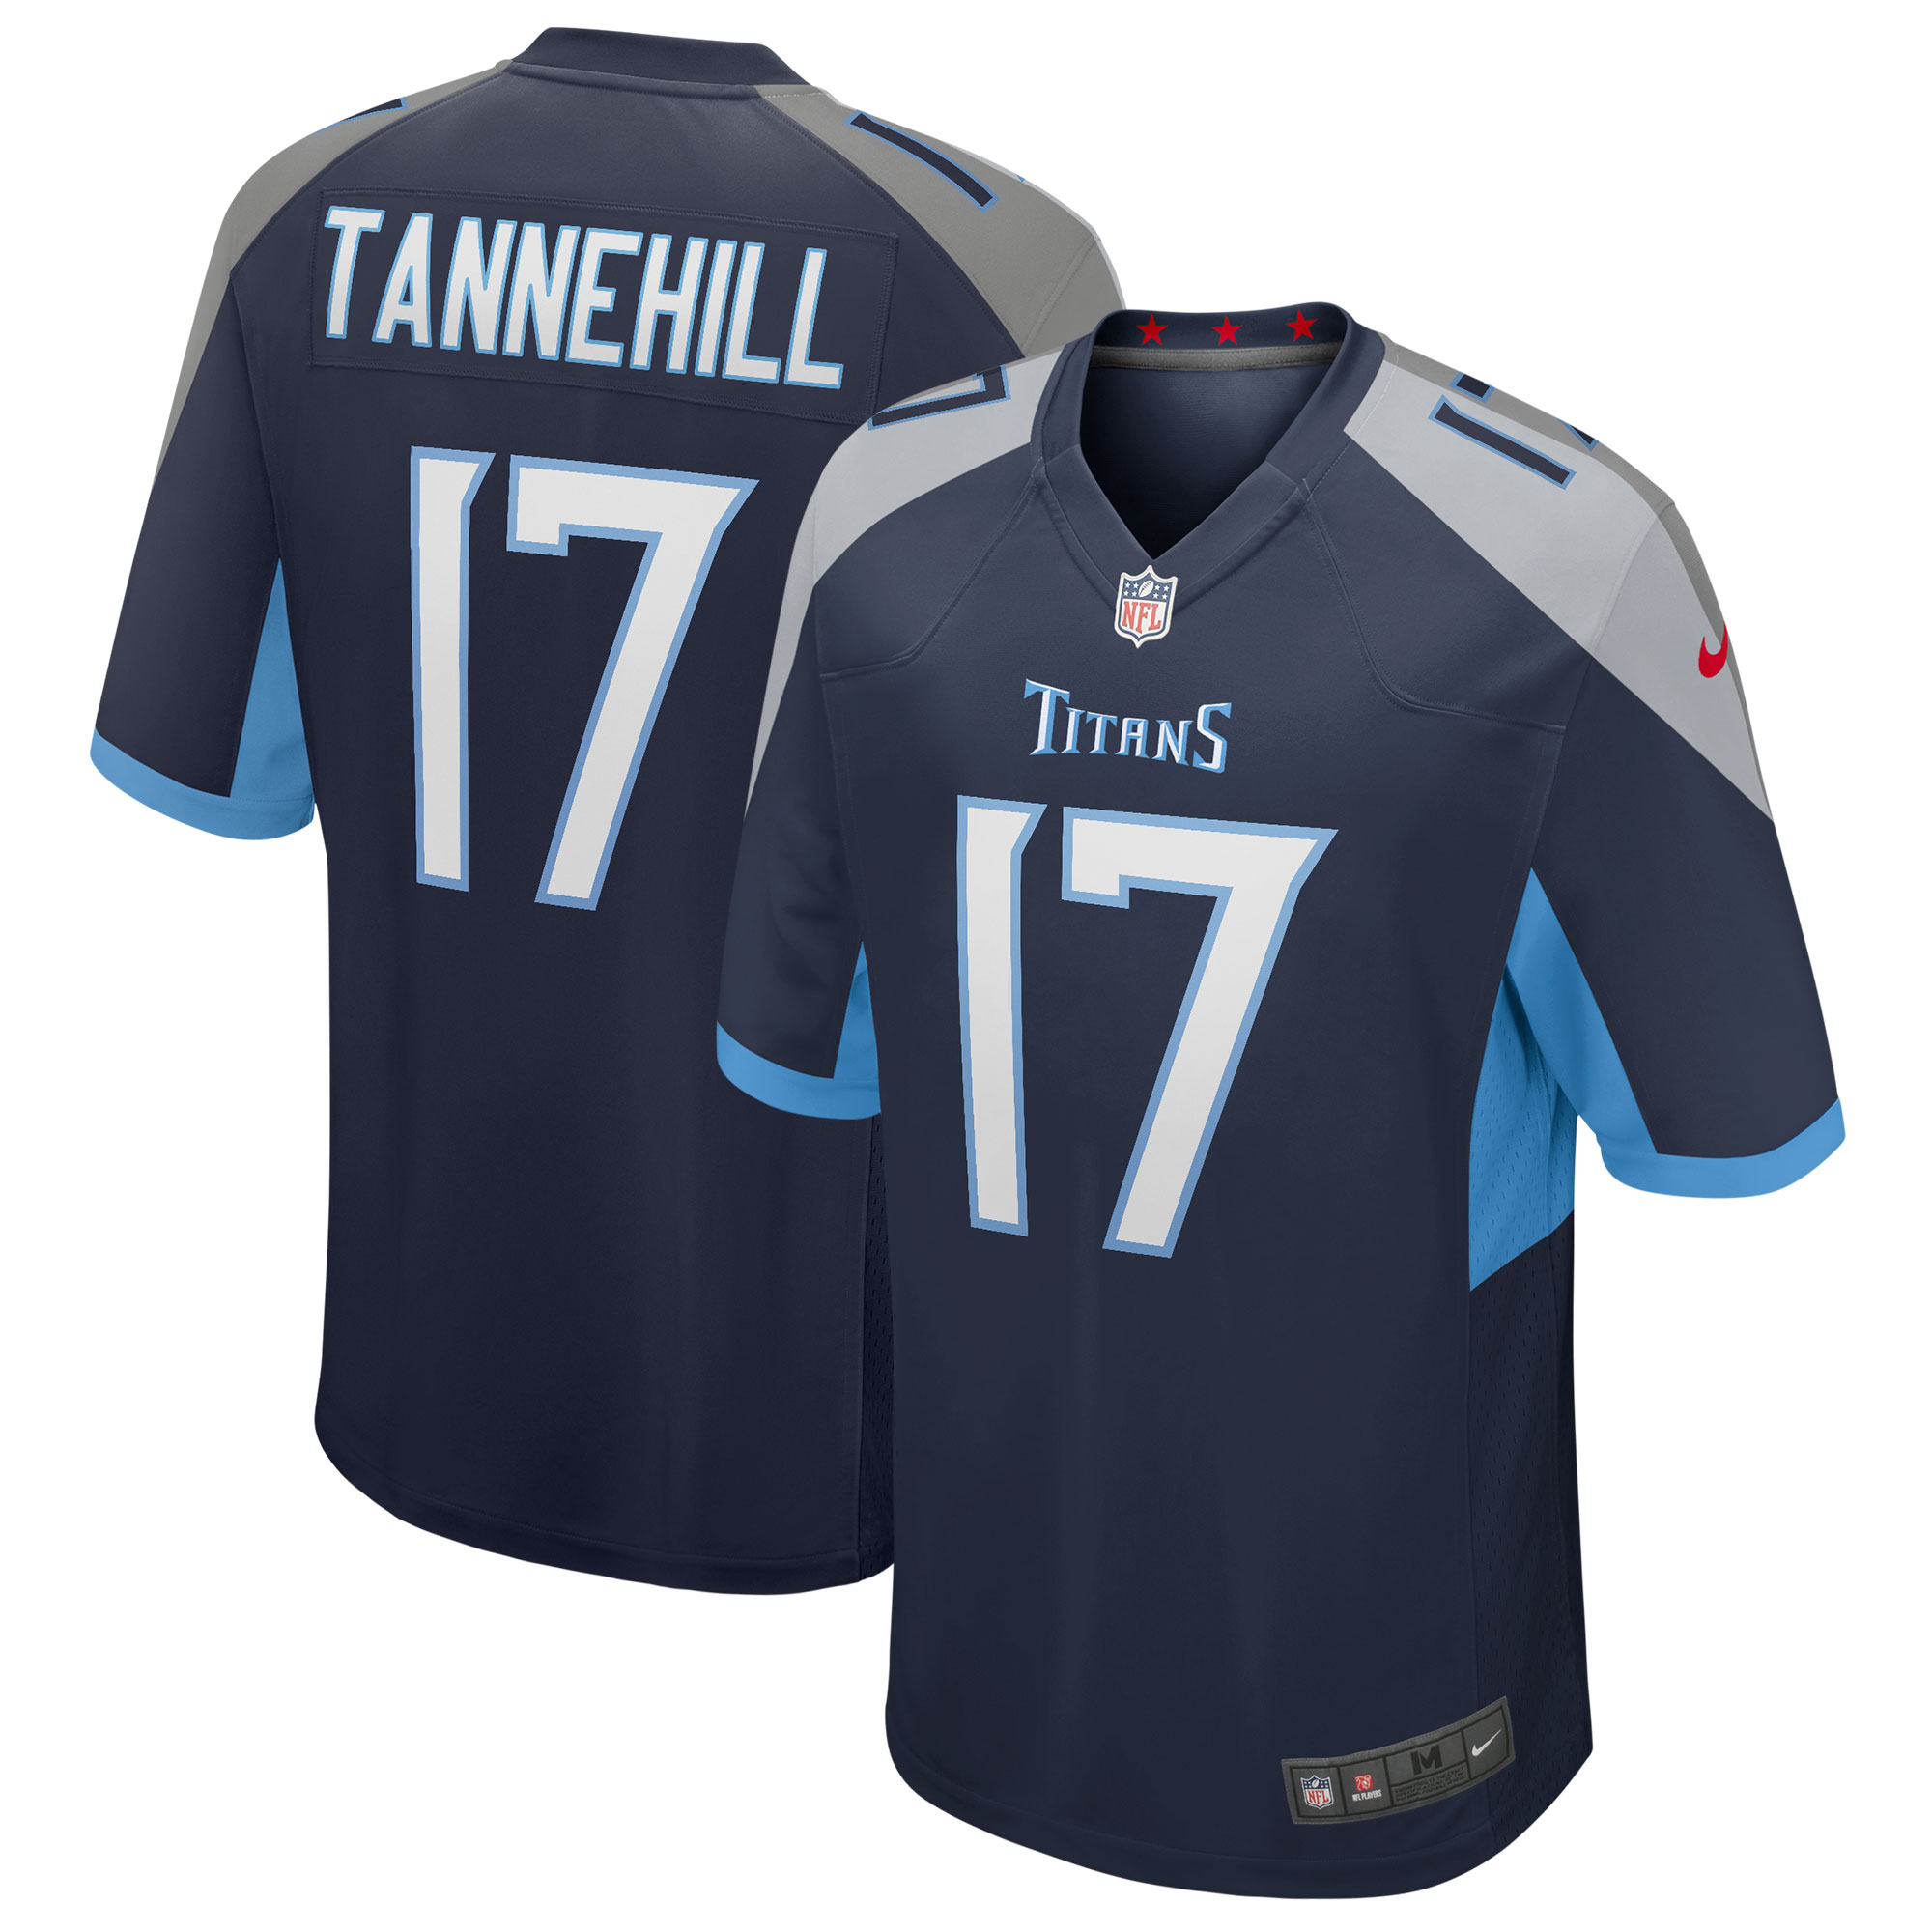 Tennessee Titans Home Game Jersey 